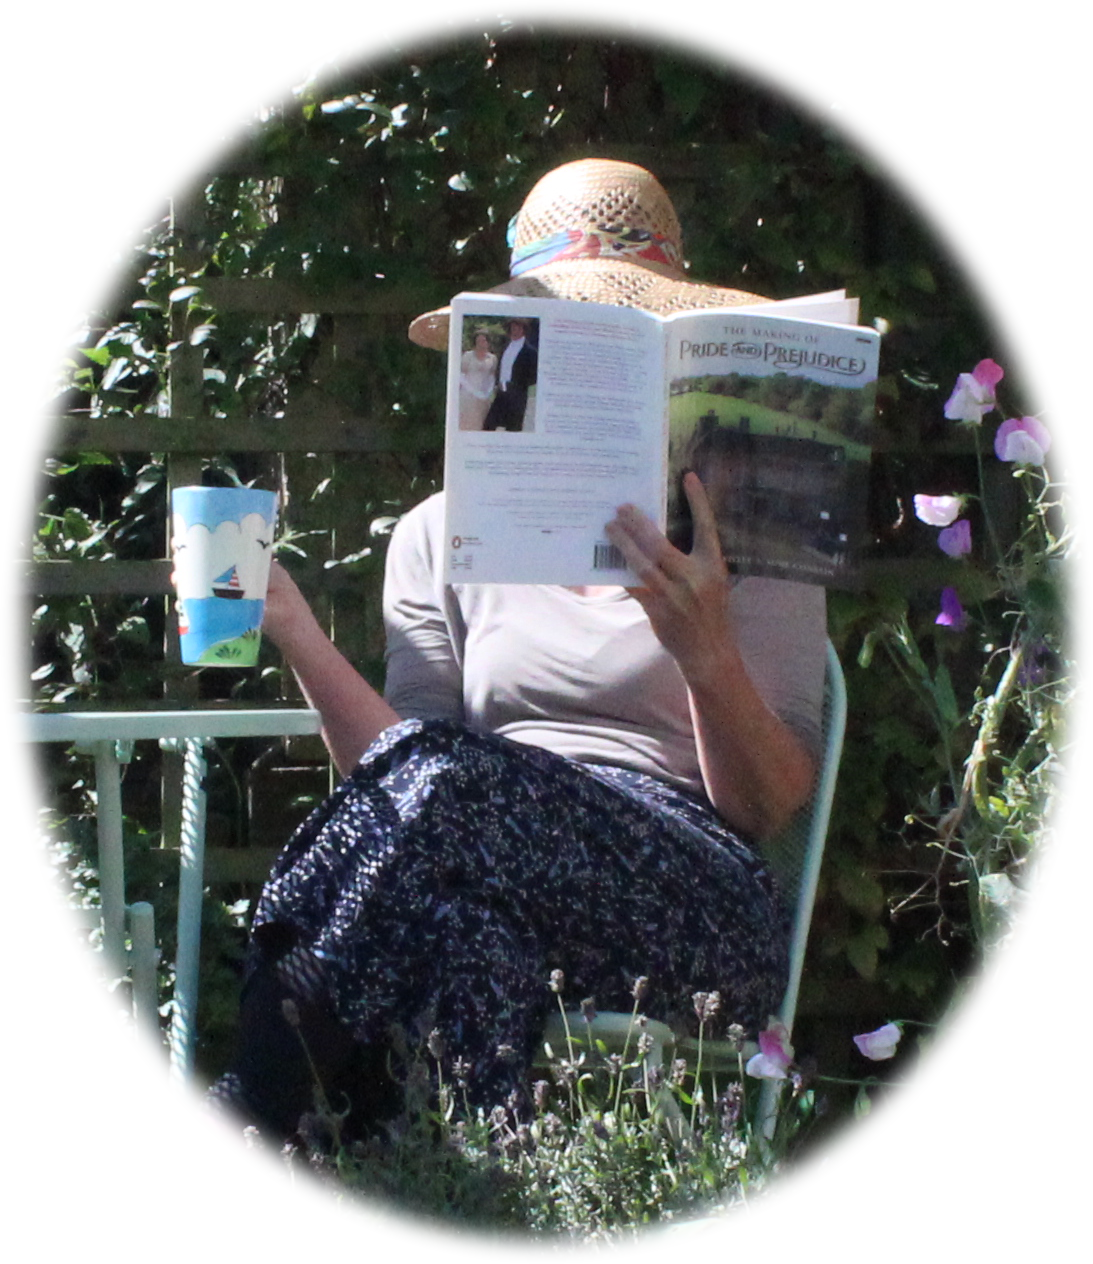 Jayne Davis with a book and a drink